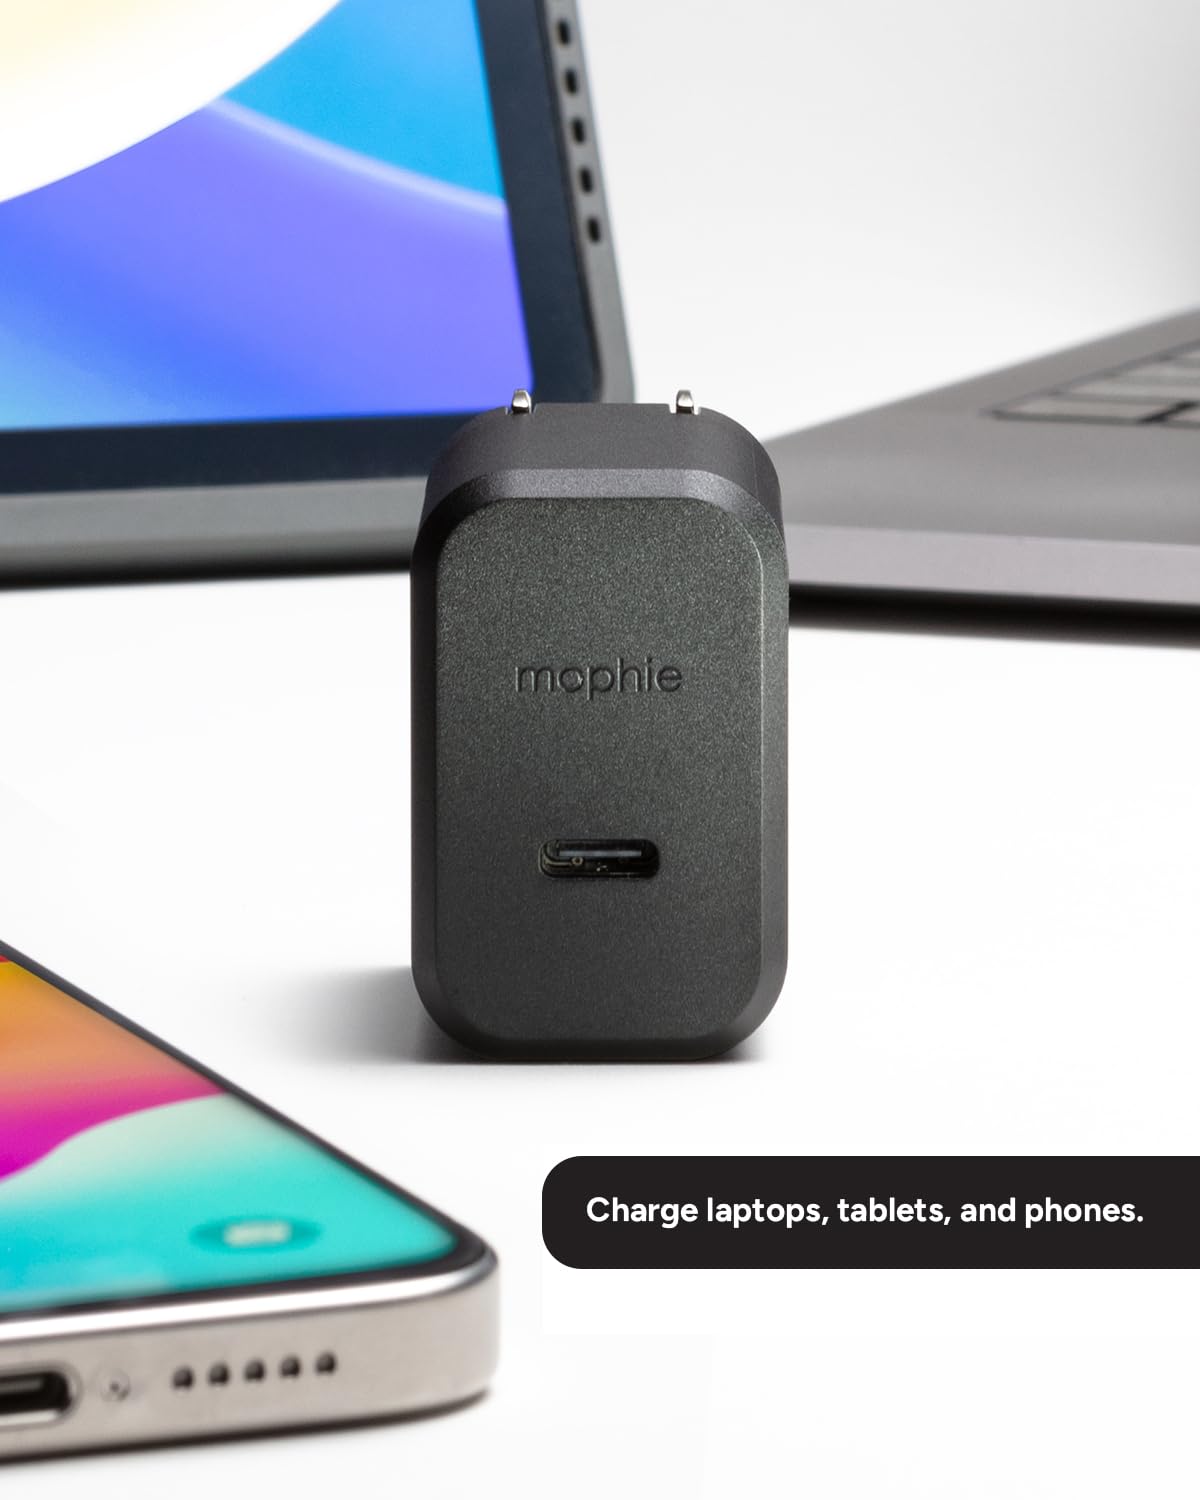 mophie GaN 30W Charger - Fast Charging 1 USB-C PD Port, with Foldable Prongs, Ultra-Compact Design for Phones, Tablets, Laptops, Made with Recycled Materials, Black